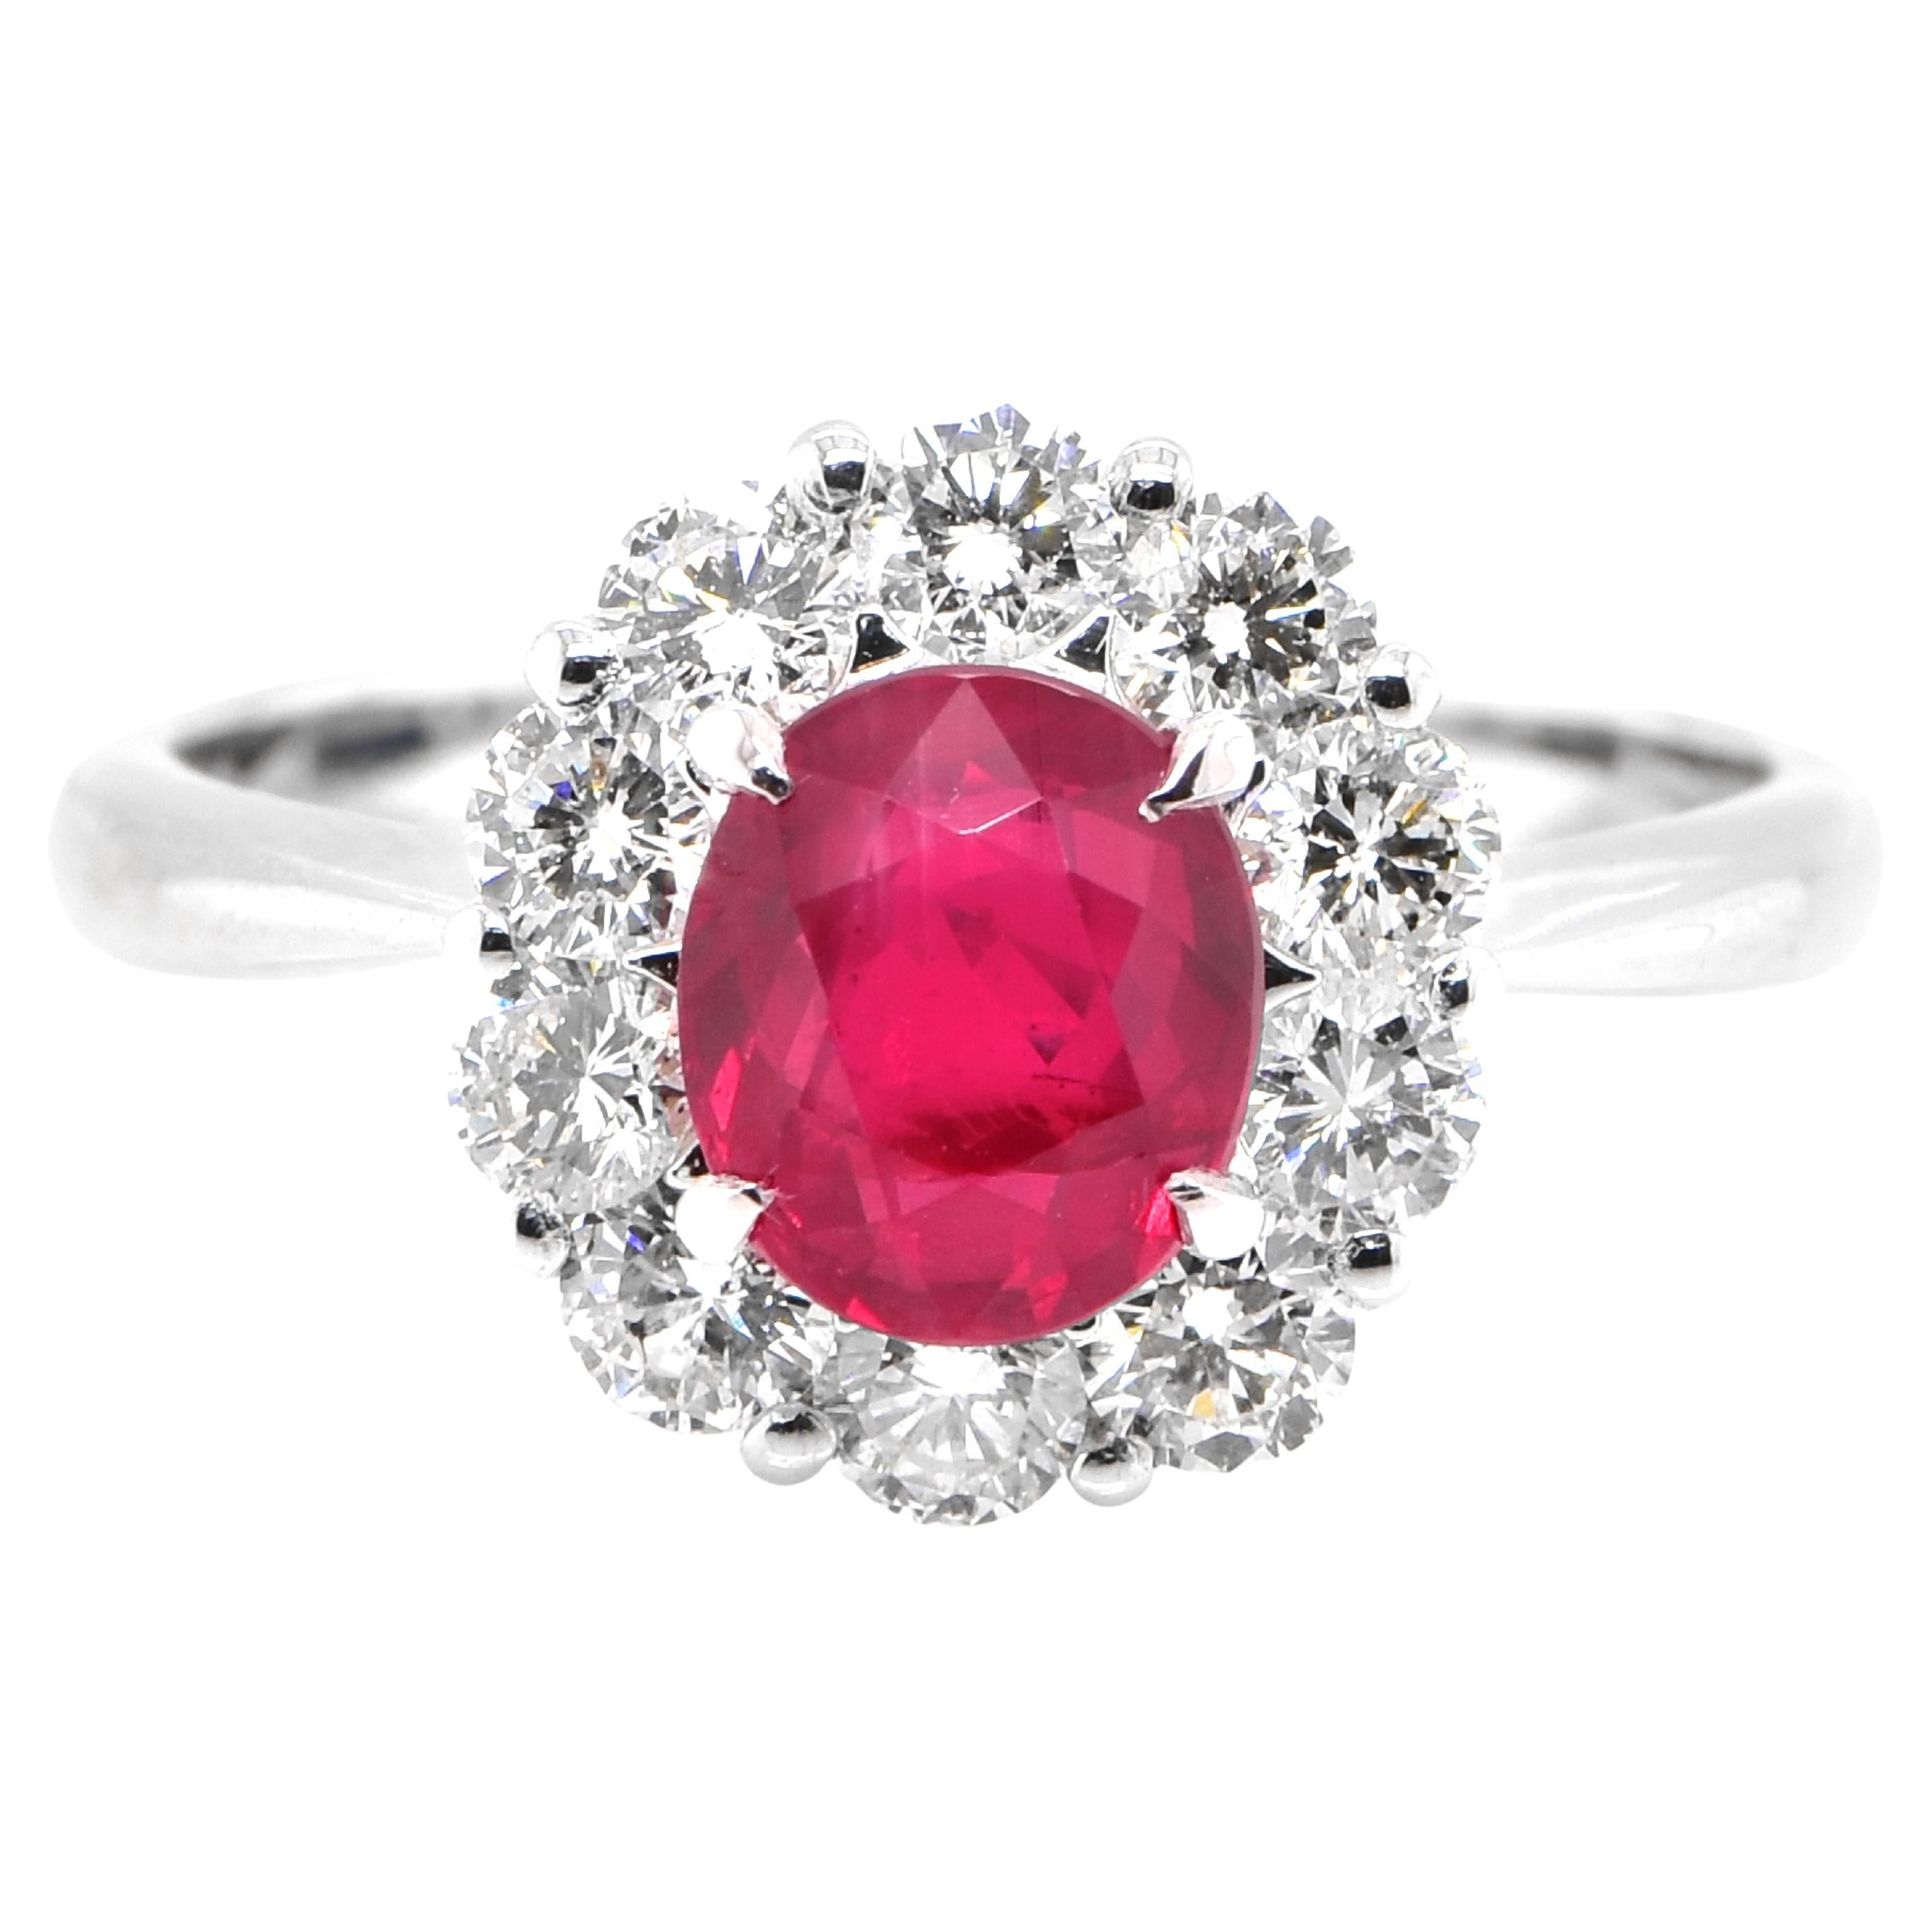 AIGS Certified 1.39 Carat Untreated Ruby and Diamond Ring Made in Platinum